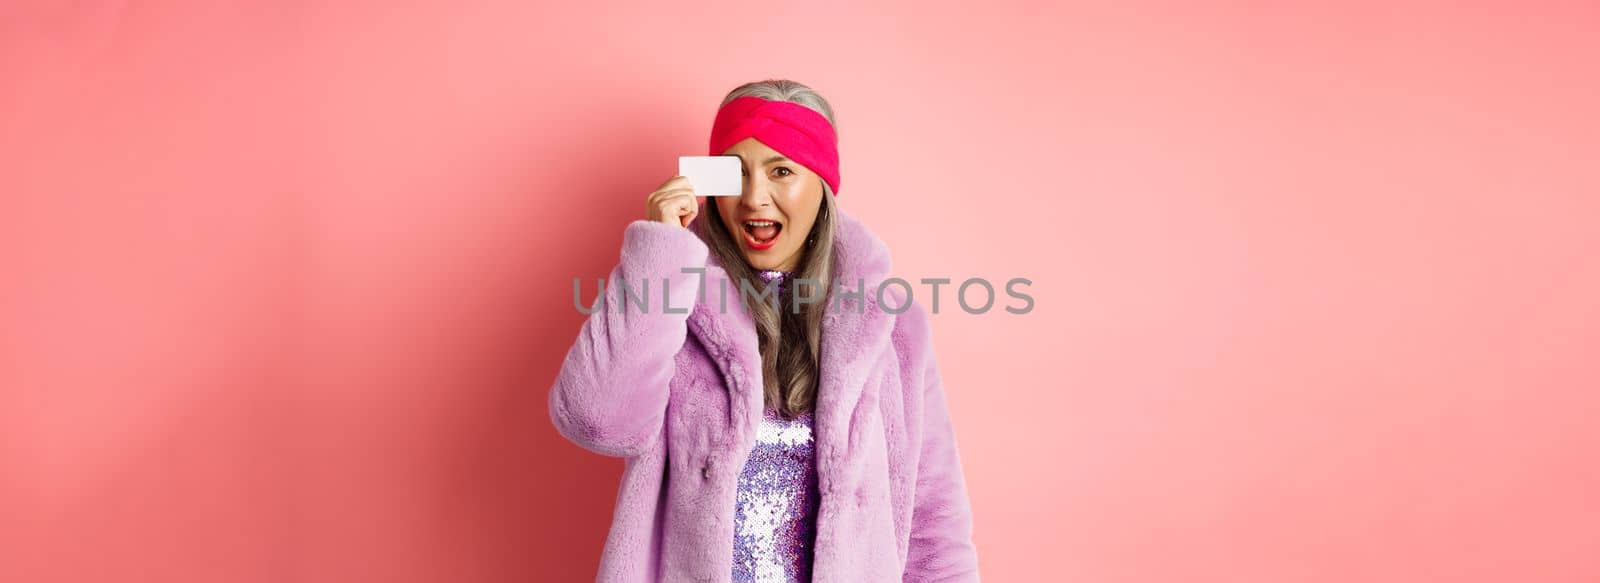 Shopping and fashion concept. Beautiful asian middle-aged woman showing plastic credit card on face and looking excited at camera, standing over pink background.